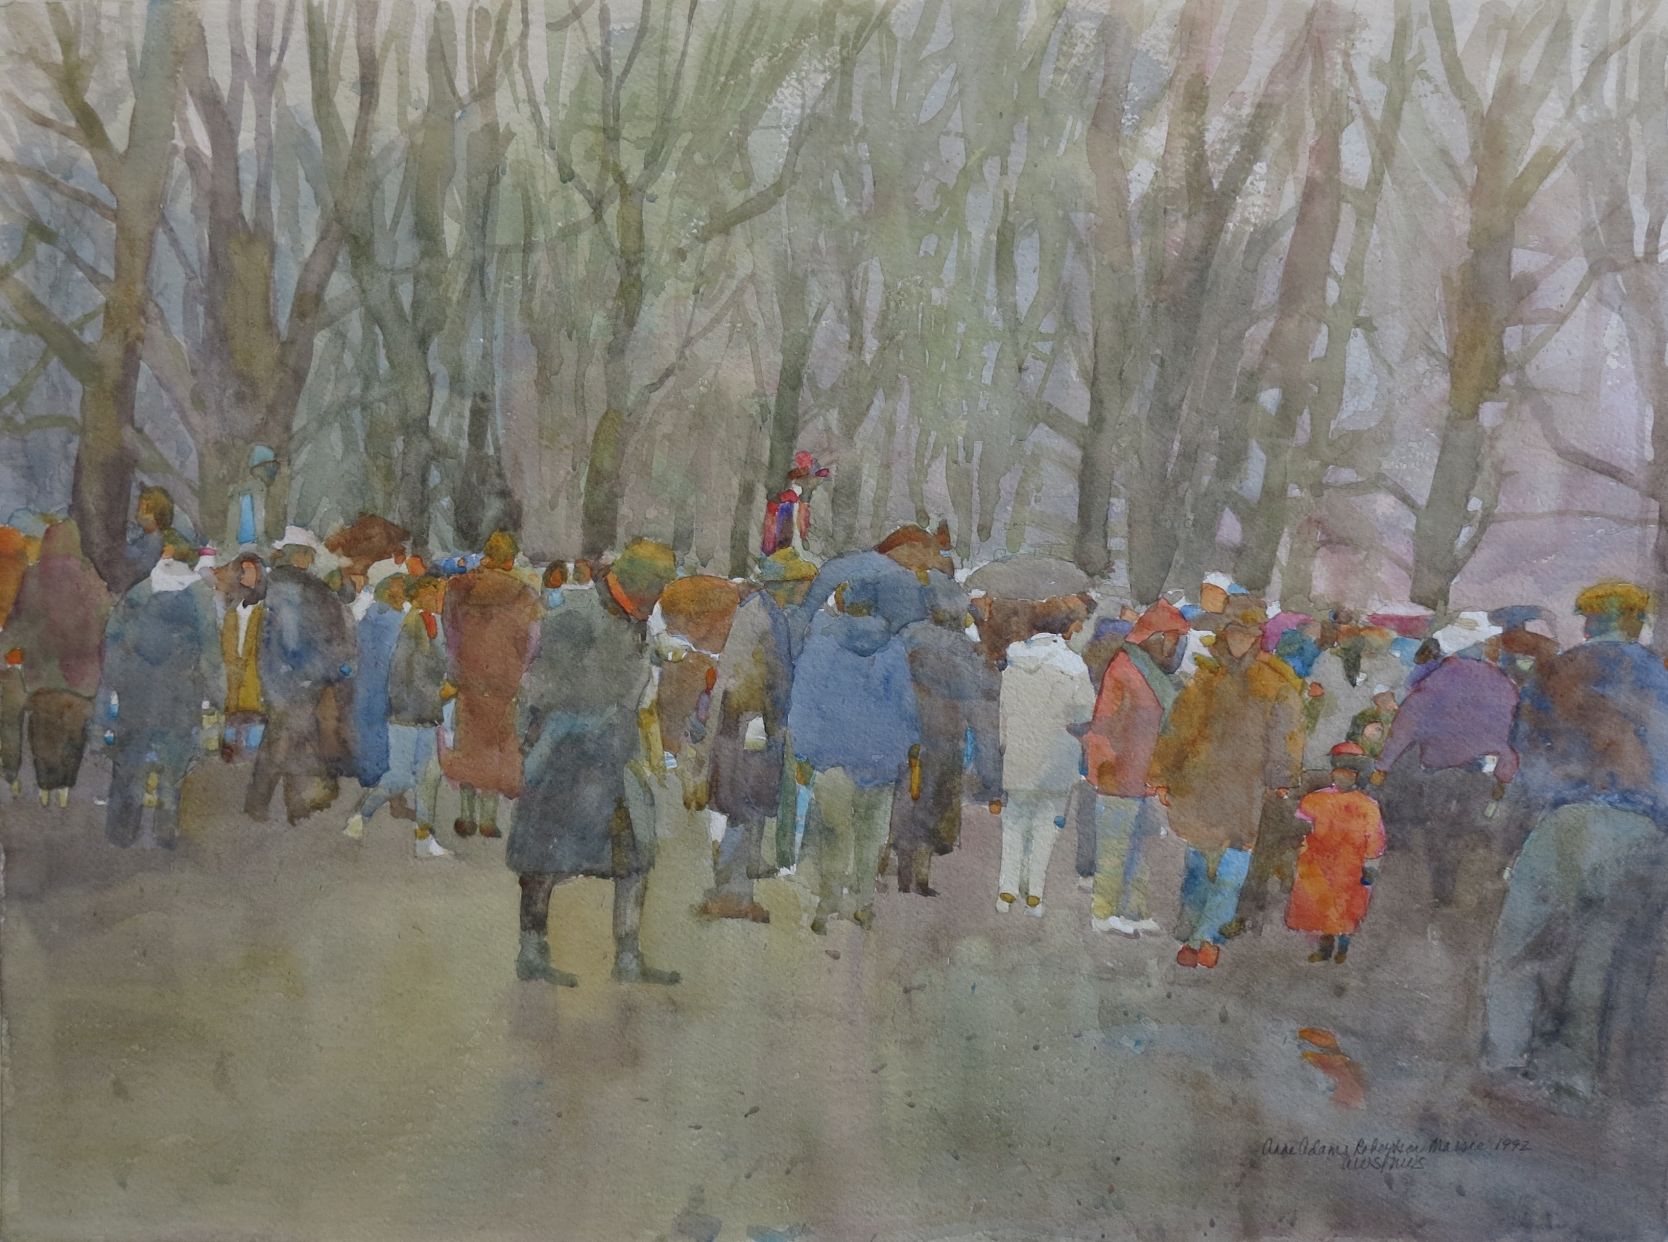 First Friday Massie retrospective exhibit, Ron Boehmer at the Lynchburg Art Club among openings